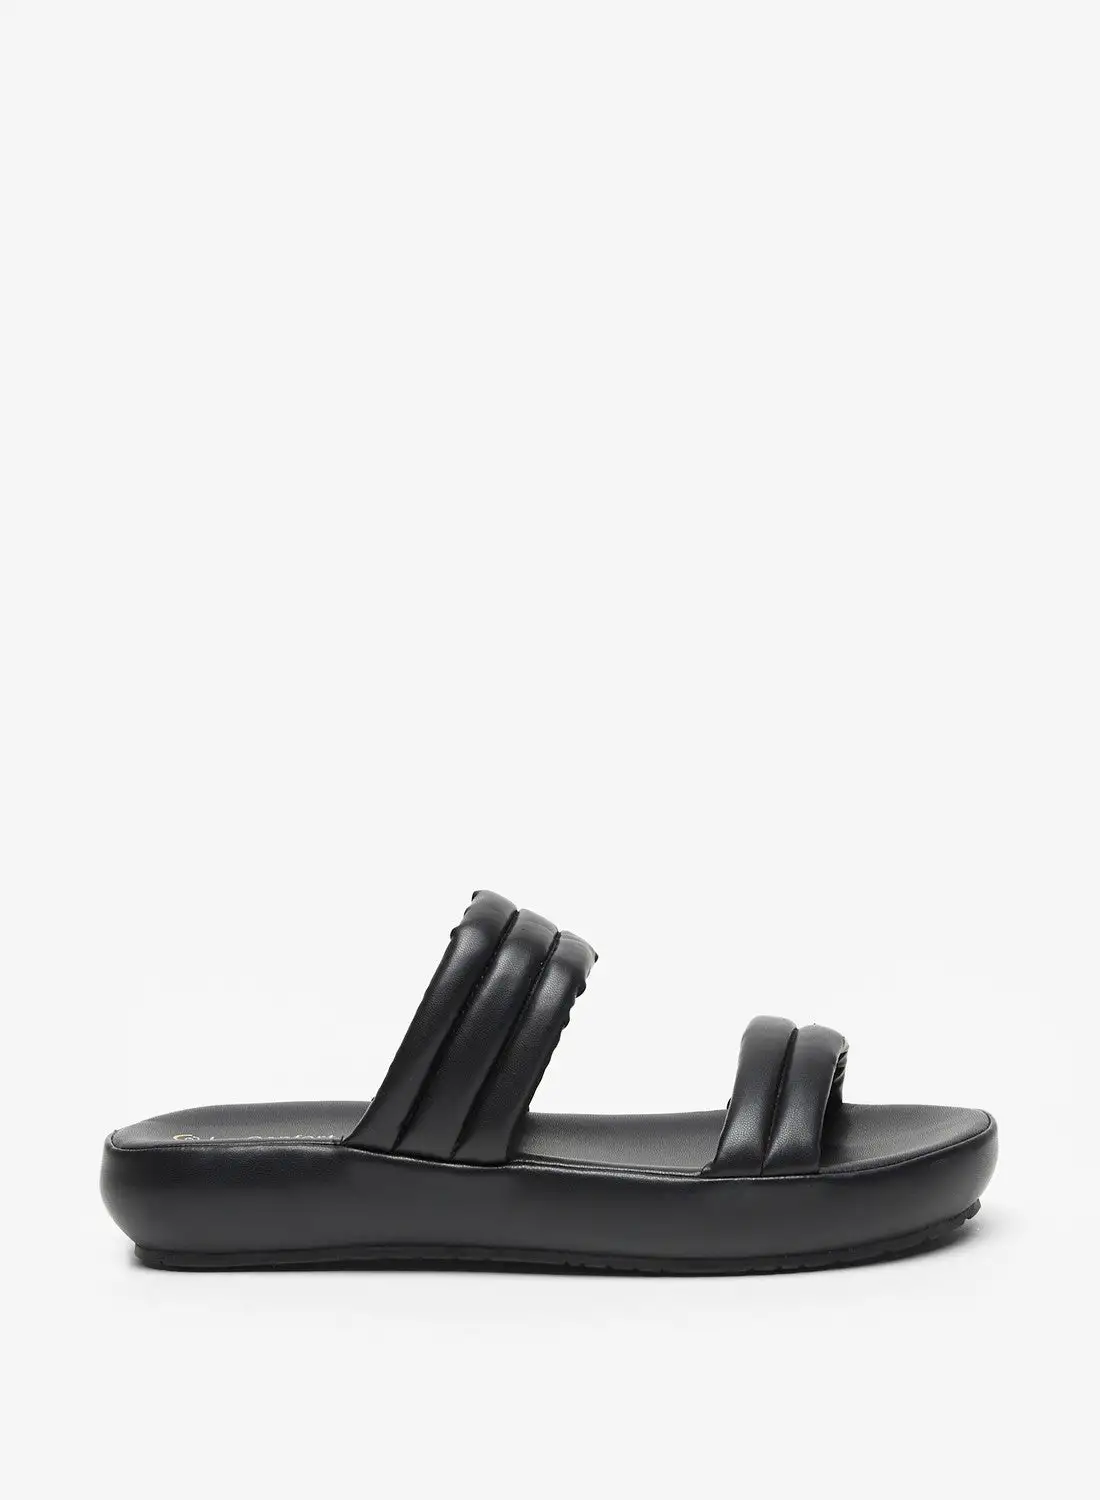 Le Confort Womens Textured Slip-On Sandals